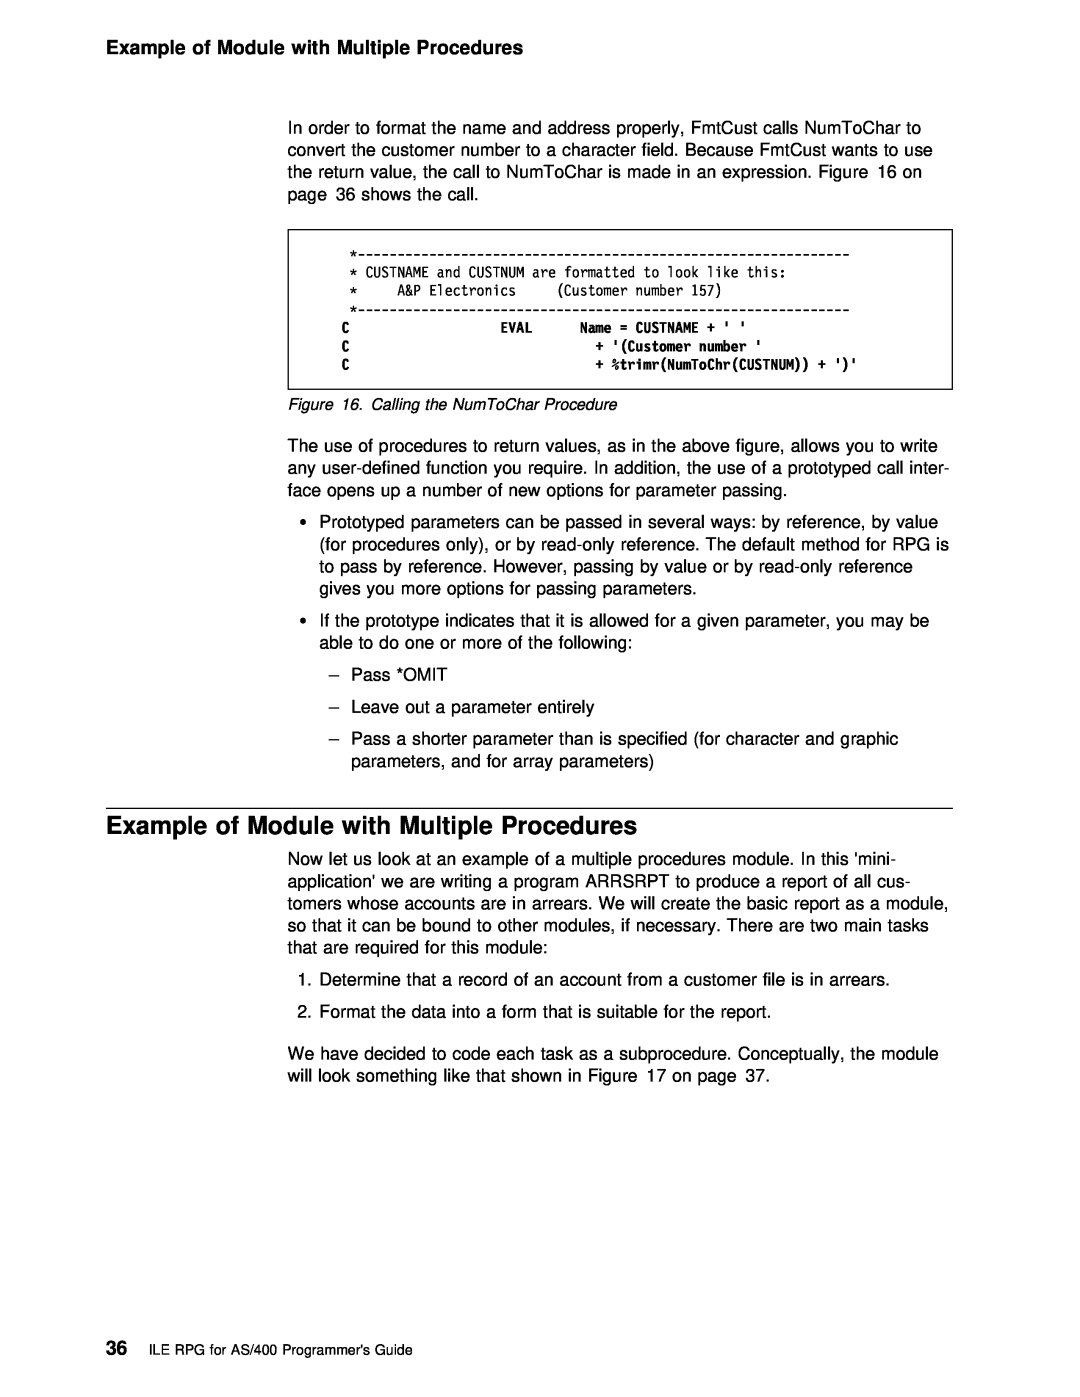 IBM AS/400 manual Example of Module with, Multiple 